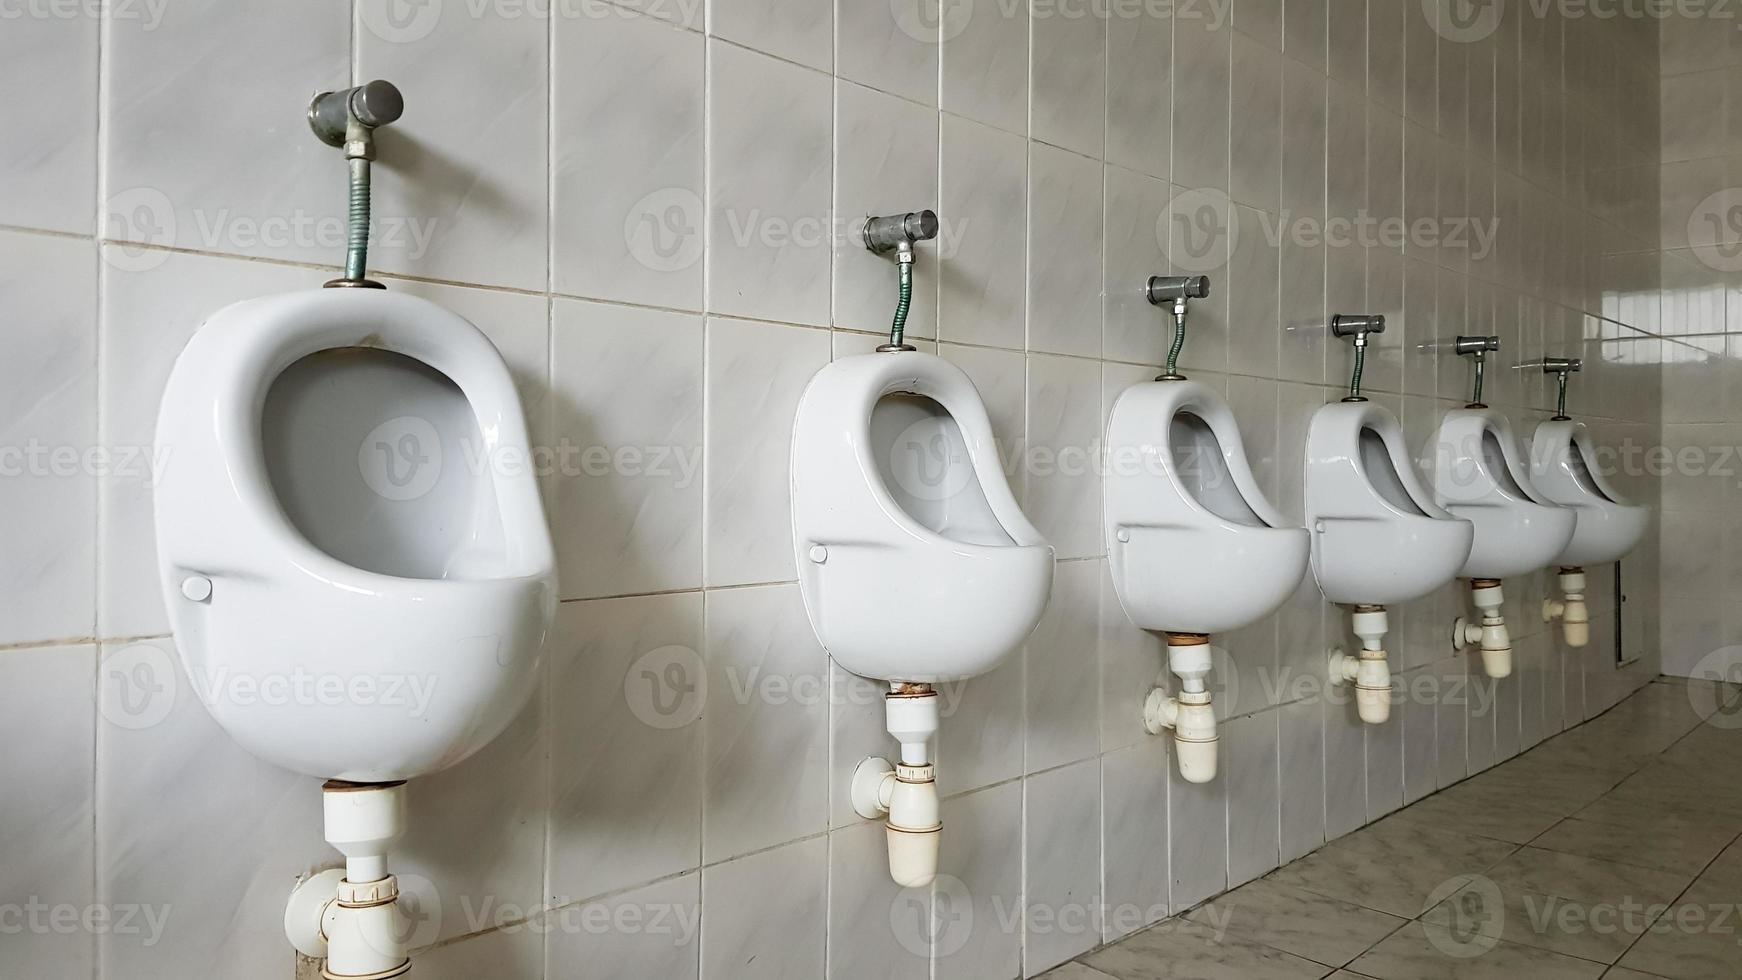 Public toilets with lots of ceramic urinals. Large public toilet, wall mounted bowls in the toilet. Urinals prepare bowls for men. photo